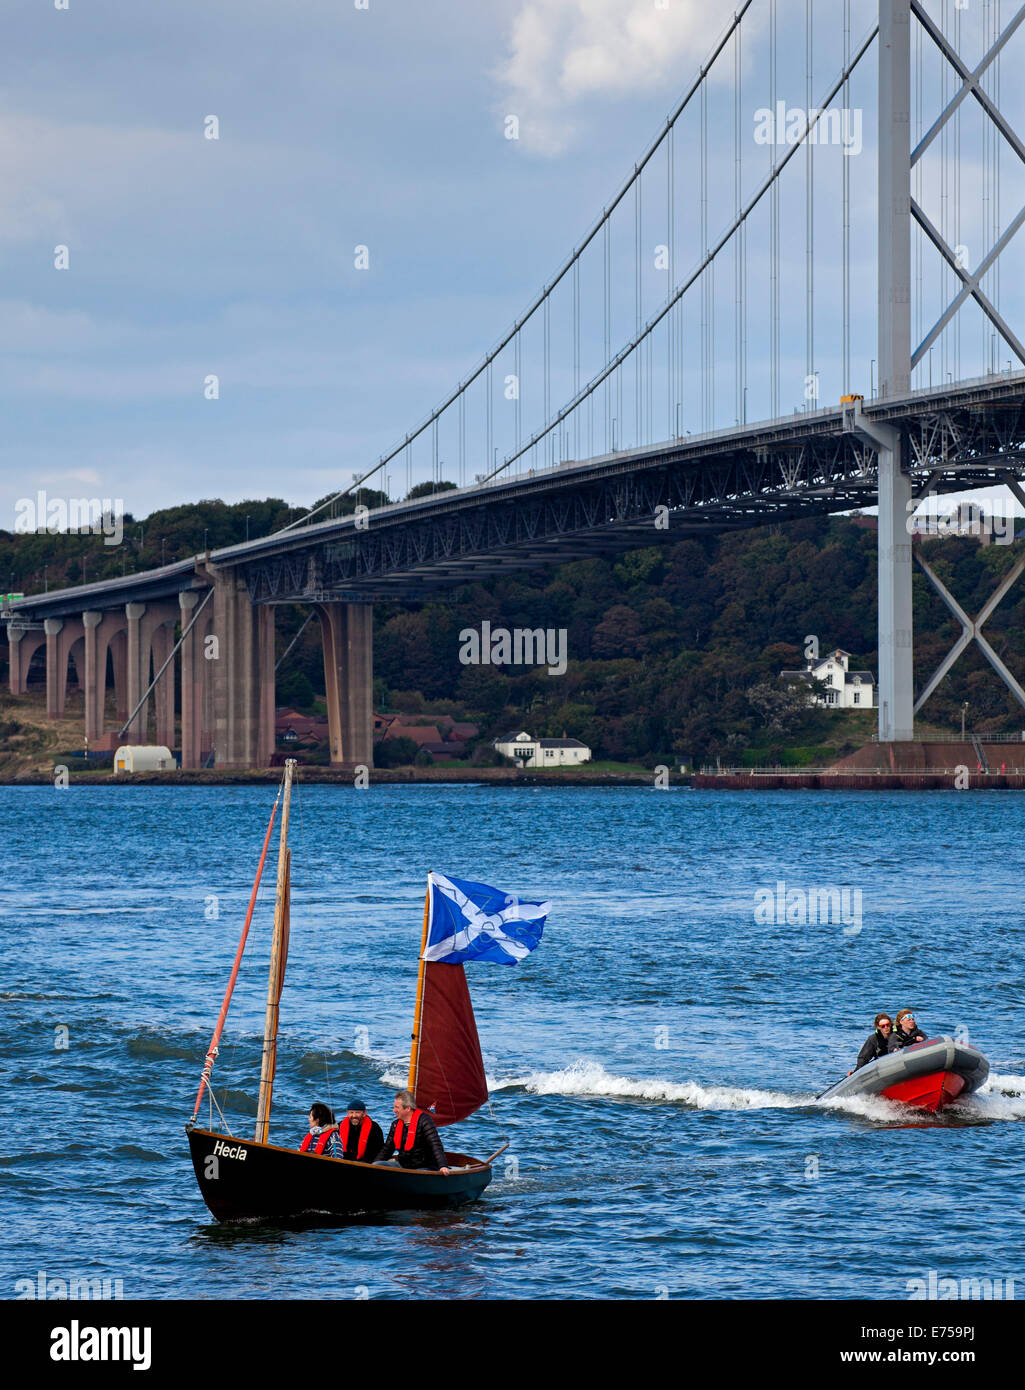 Queensferry, Forth estuary, Scotland. 7th Sep, 2014. Due to one Scottish referendum poll putting Yes Scotland narrowly ahead for the first time, this sailing crew flying the yes saltire probably felt they had the wind in their sails as they return from taking part in the Flotilla on the Forth just one of the events to celebrate the 50th birthday of the Forth Road Bridge. Credit:  Arch White/Alamy Live News Stock Photo